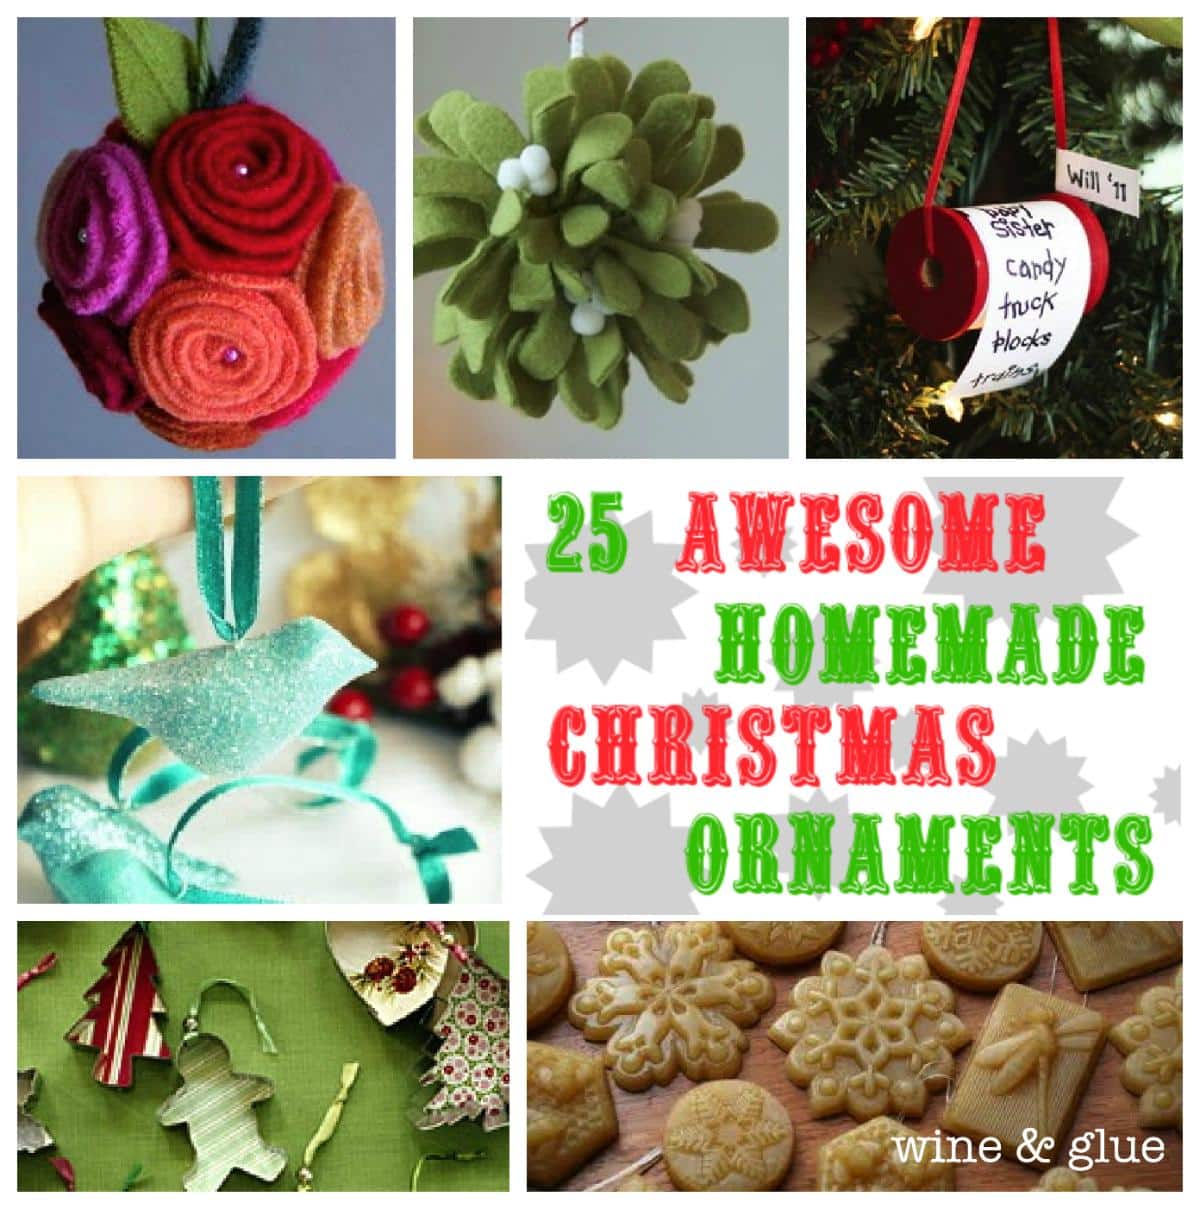 Cookie Cutters and Other Ornament Ideas poster.